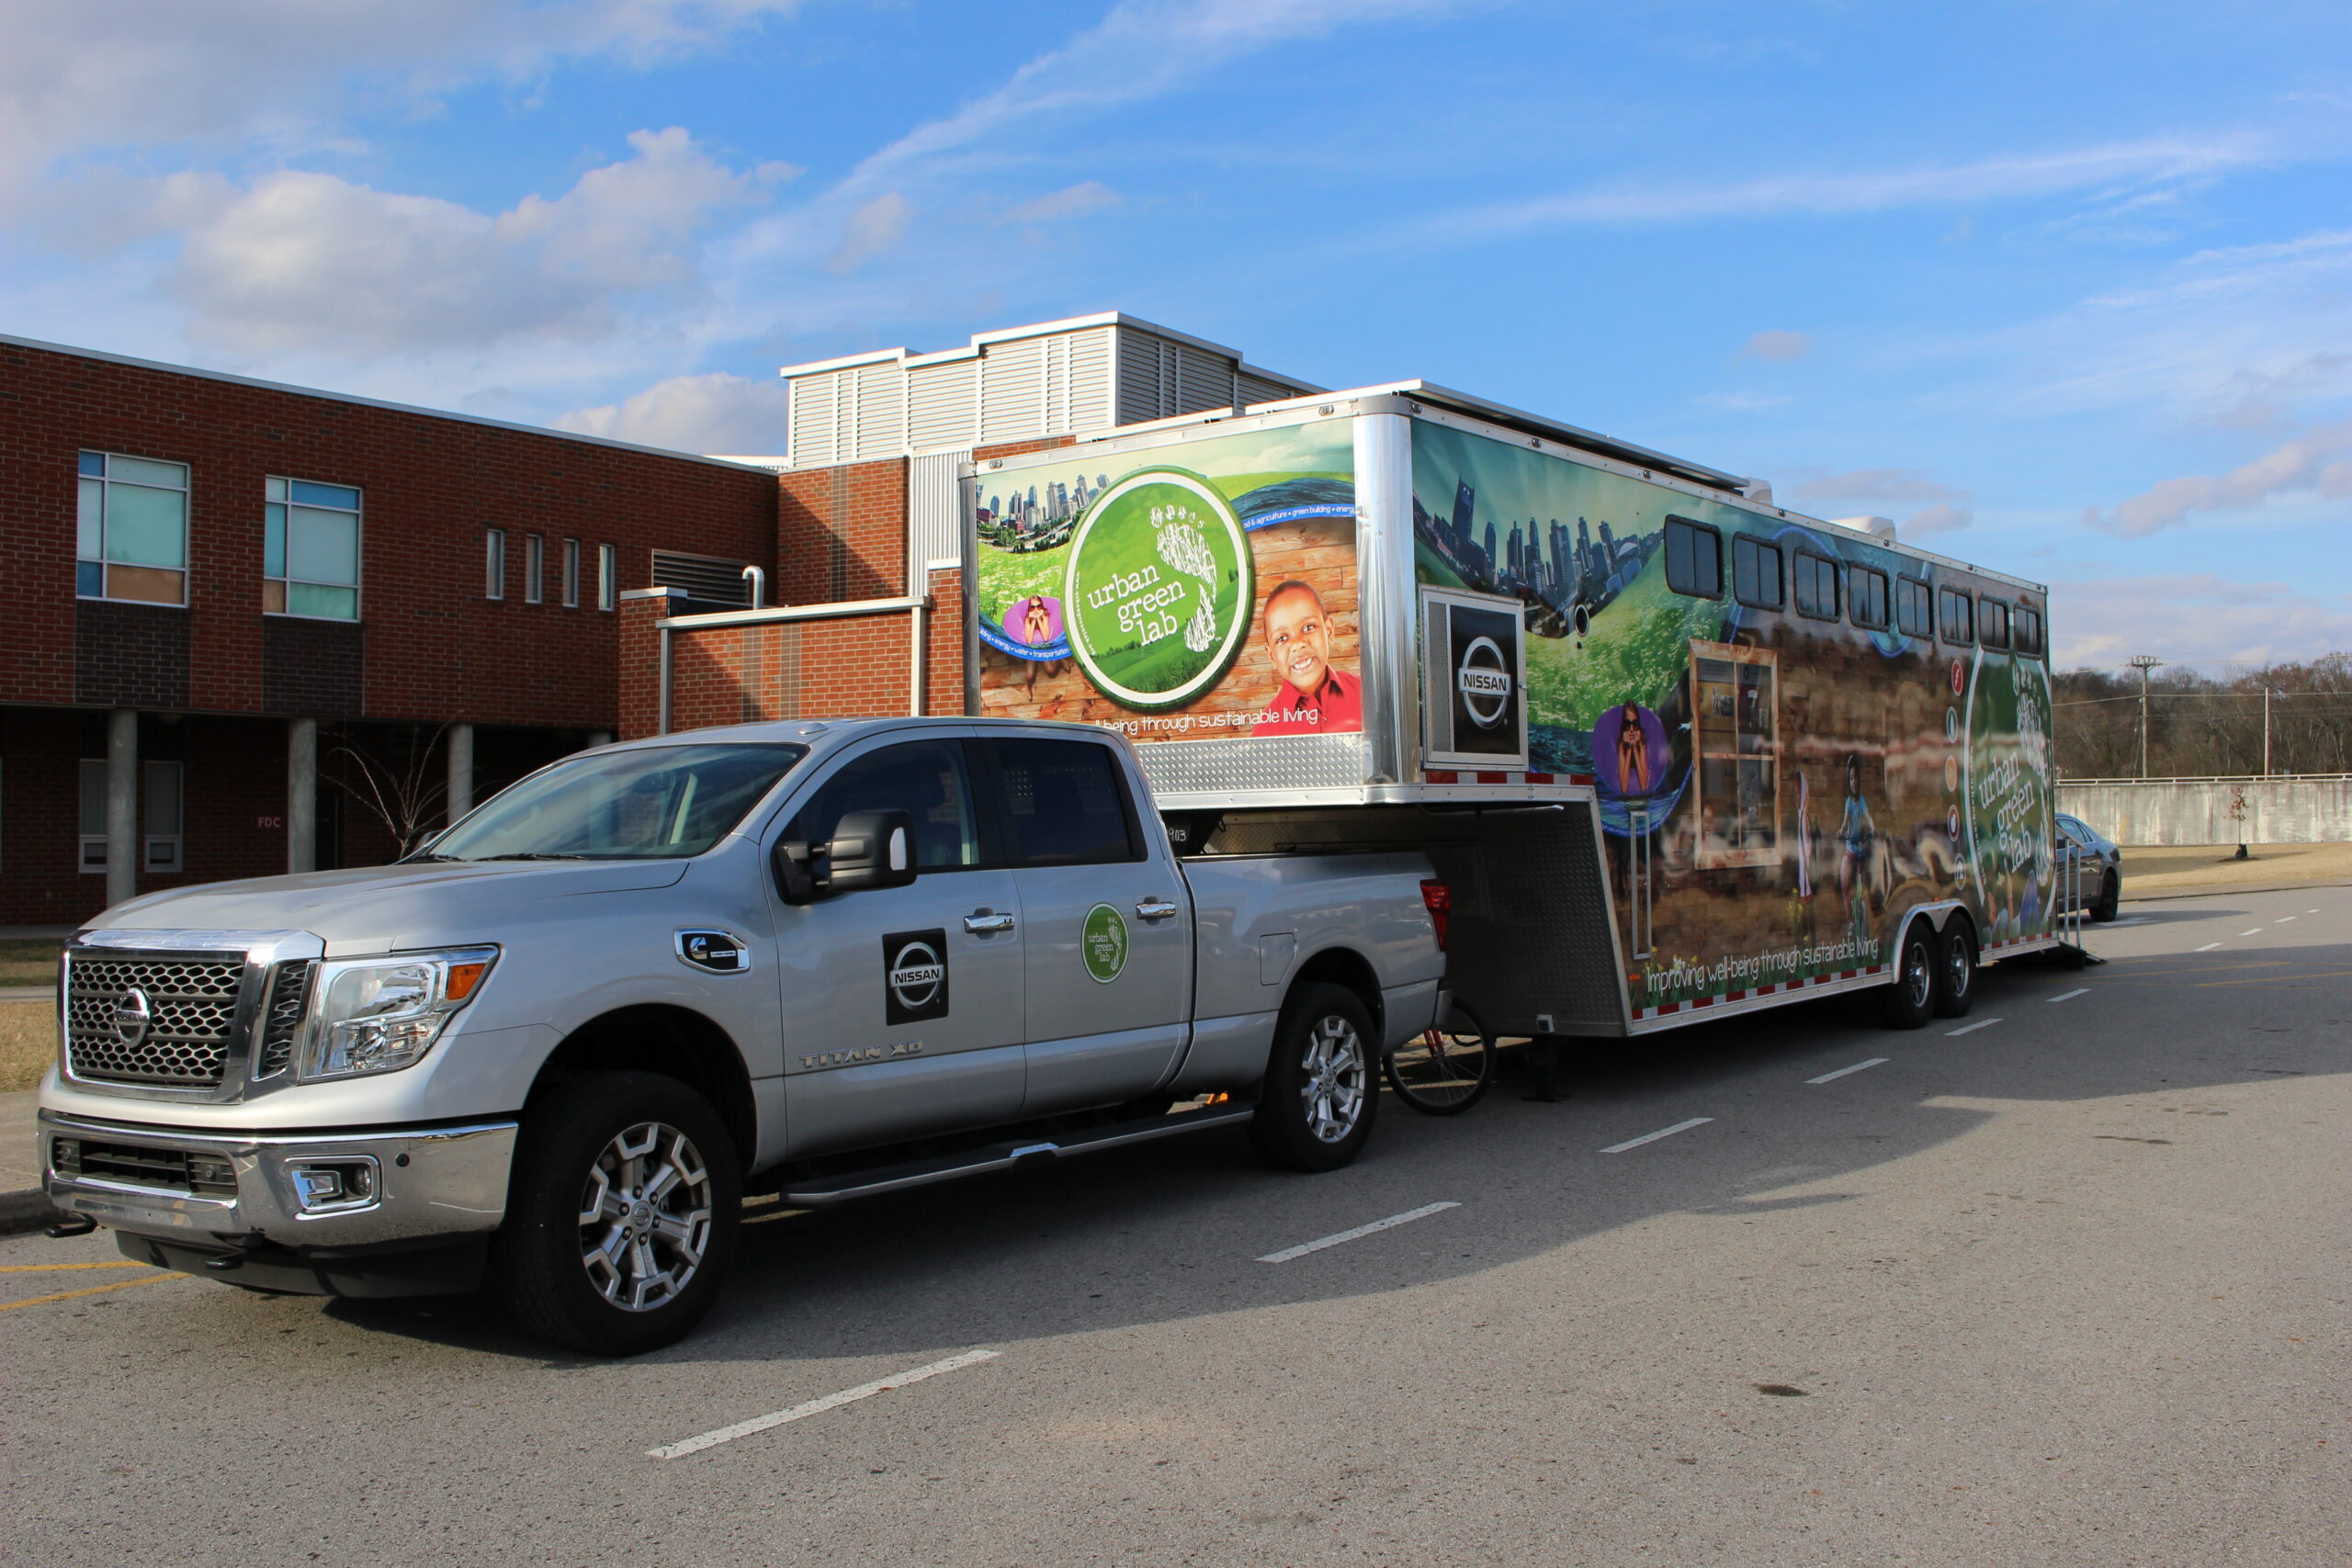 The Urban Green Lab Mobile Lab pulled by a Nissan Titan.